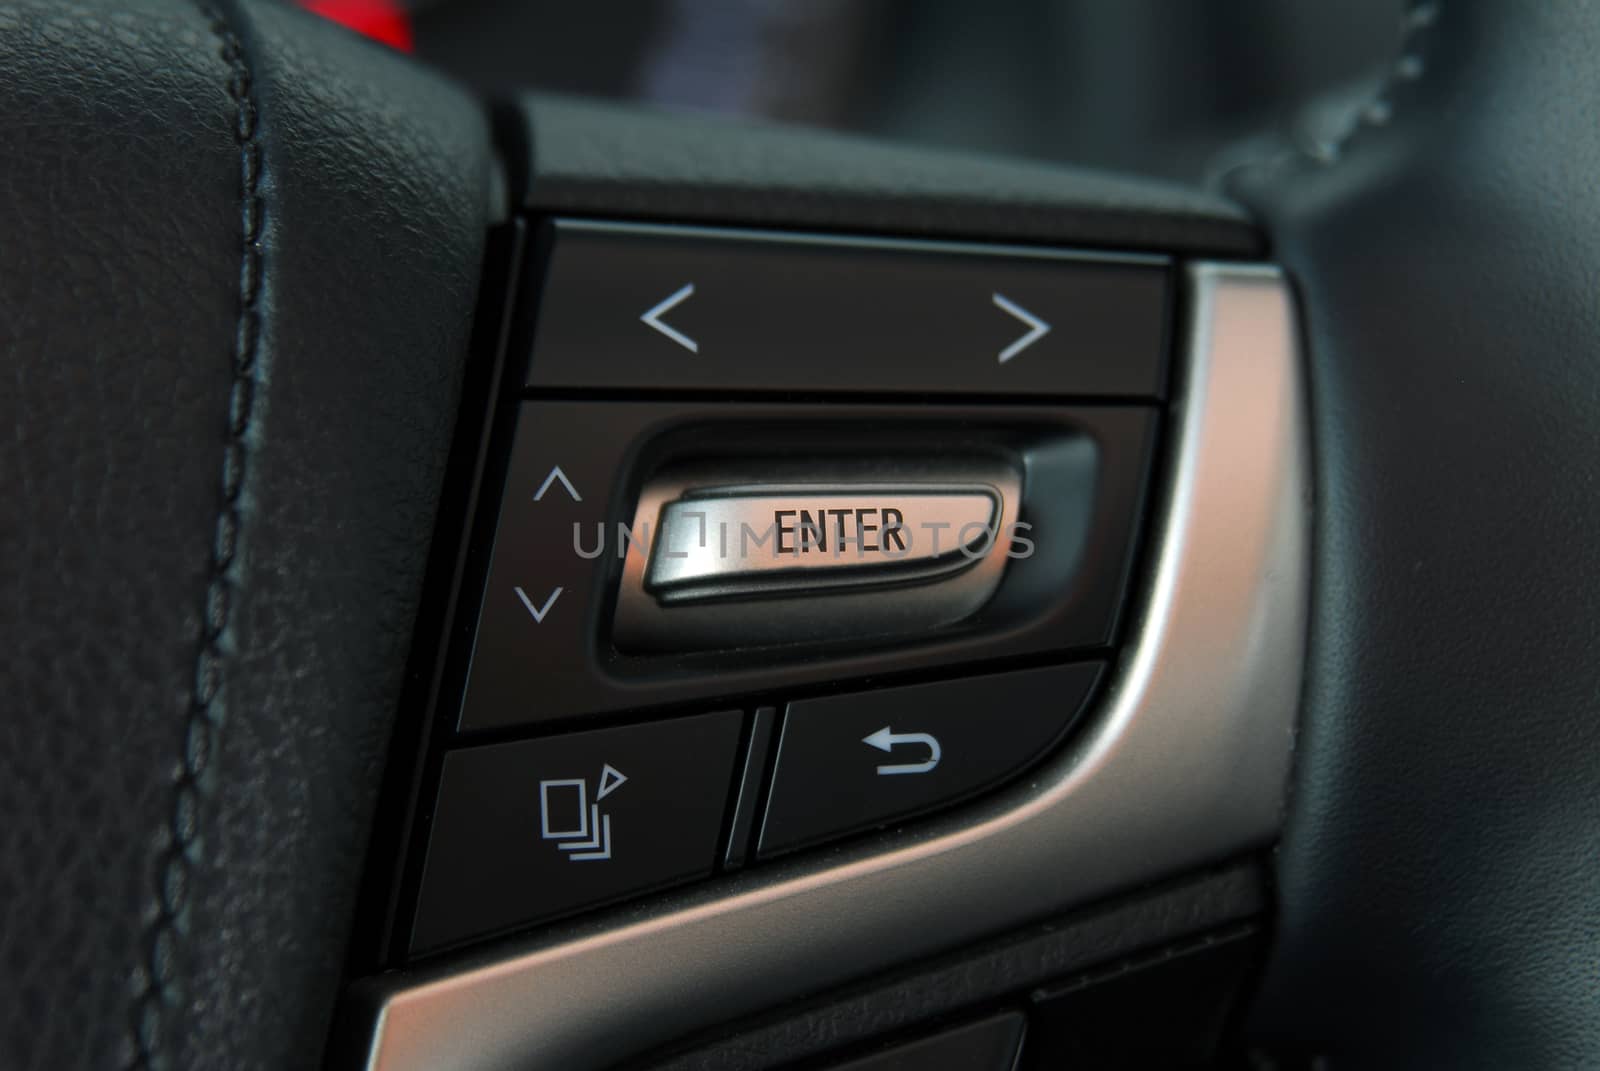 detail on the steering wheel to control cell phones